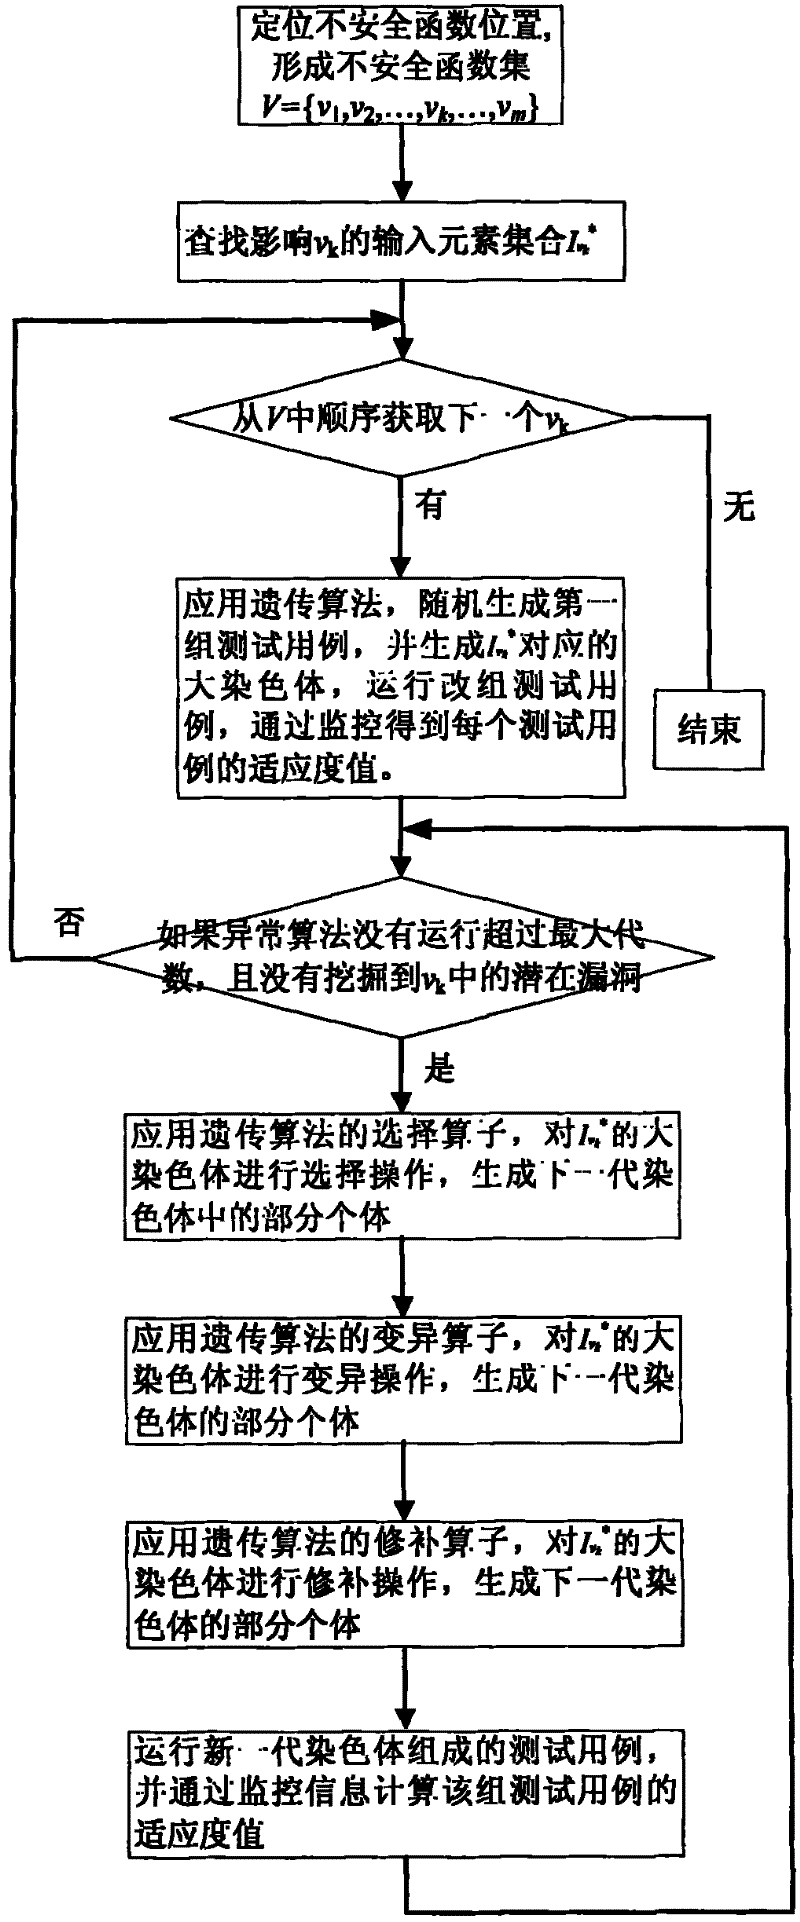 Software vulnerability analysis method of variant multi-dimensional input based on Fuzzing technology